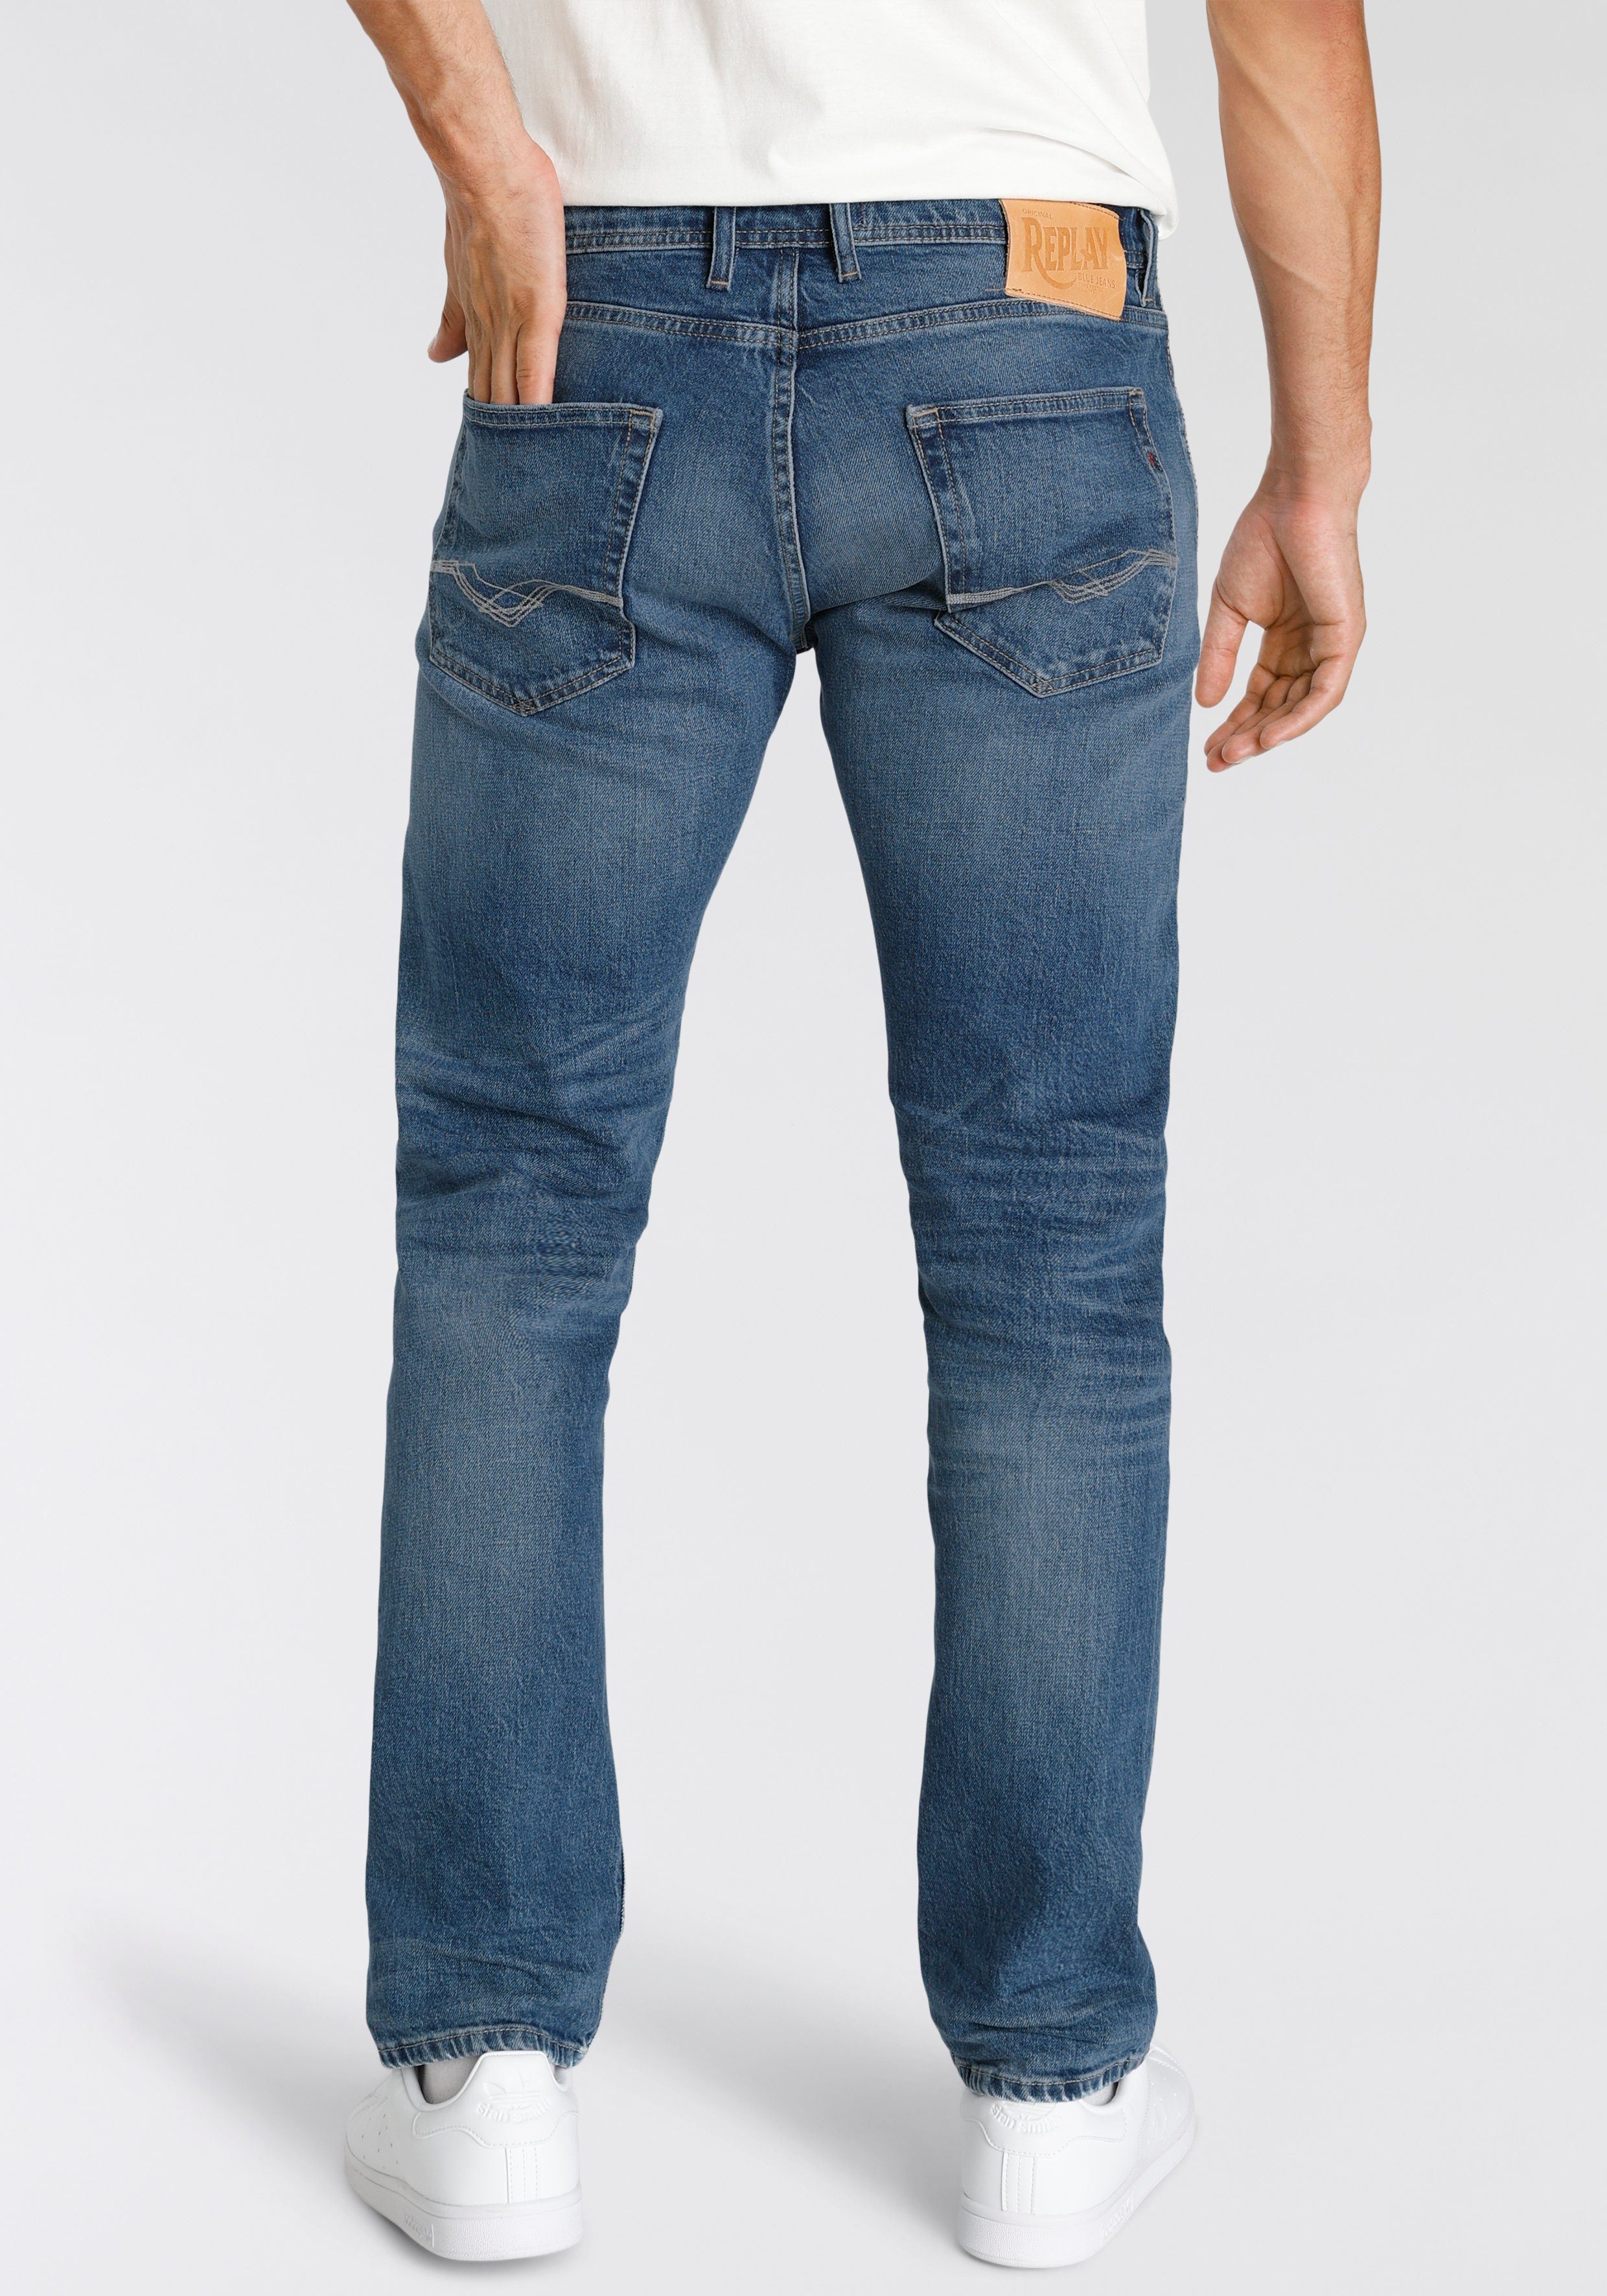 Replay Straight-Jeans GROVER Used-Waschung dezenter in